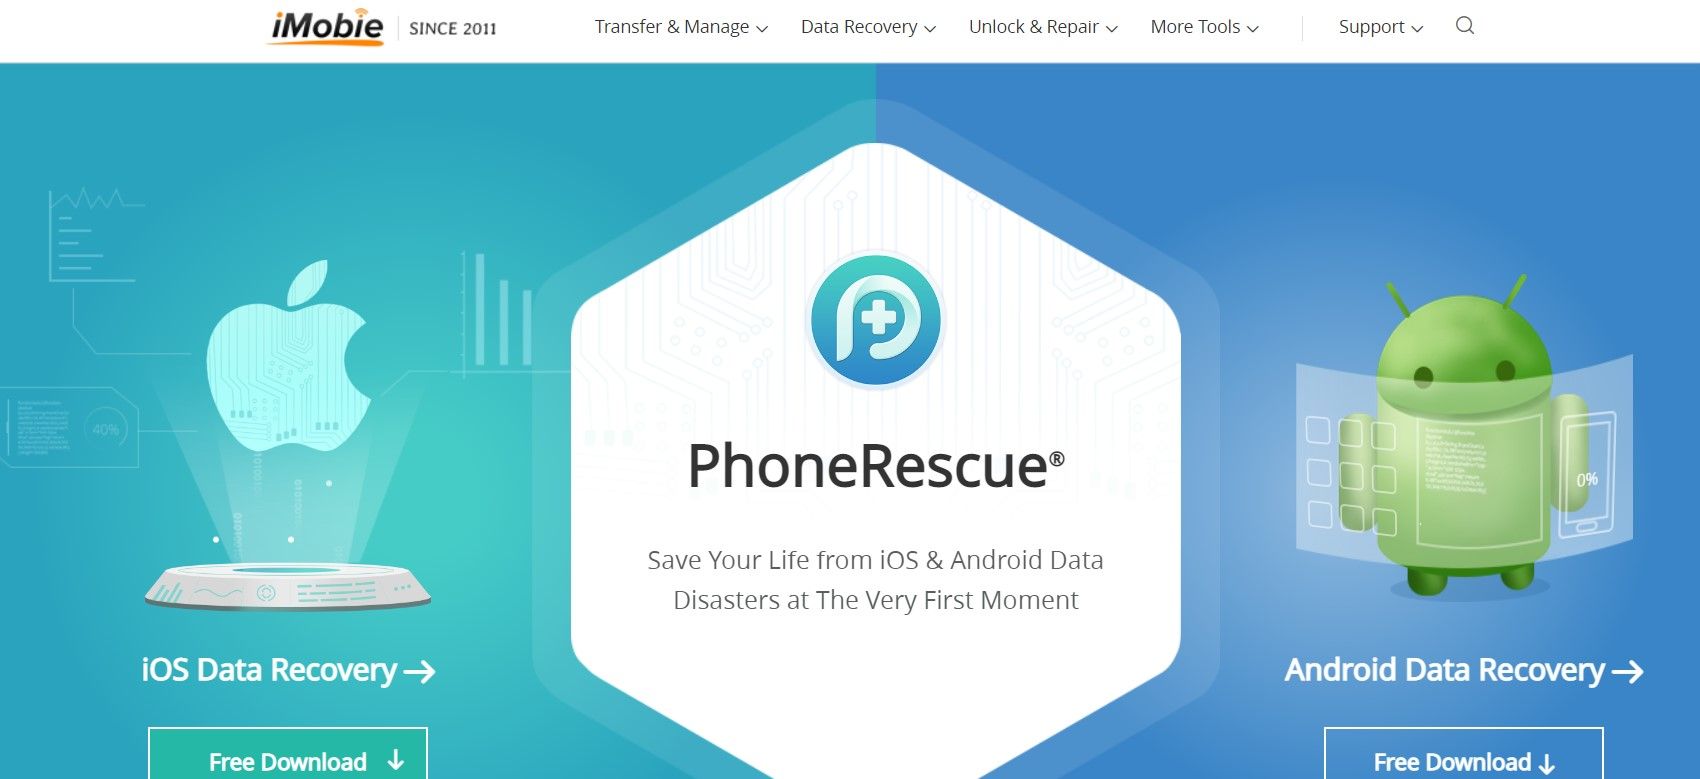 iMobile phone rescue whatsapp chat recovery tool